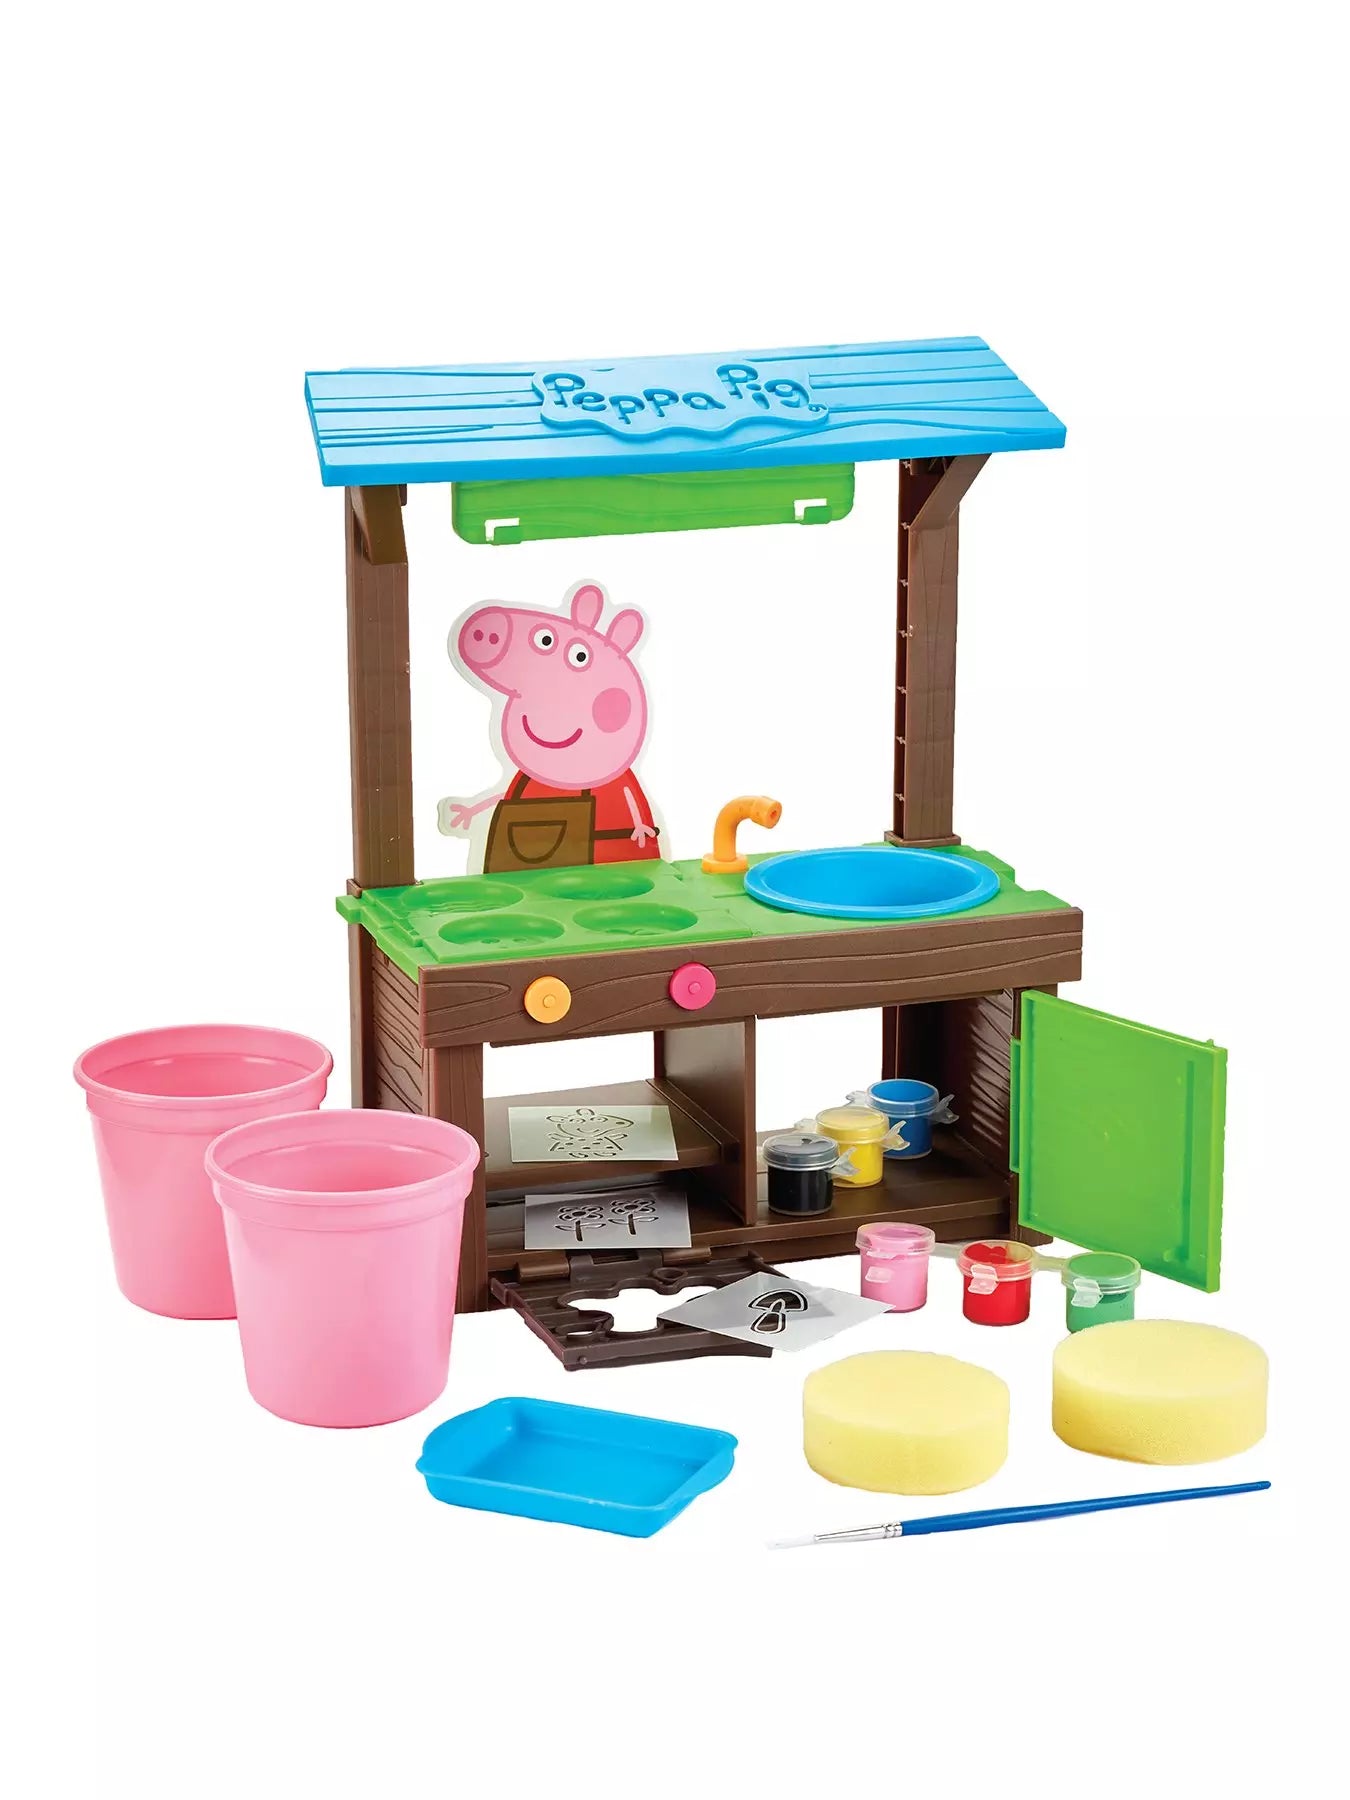 Peppa Pig Peppa's Garden Art Bench Paint And Decorate Art And Craft Playset